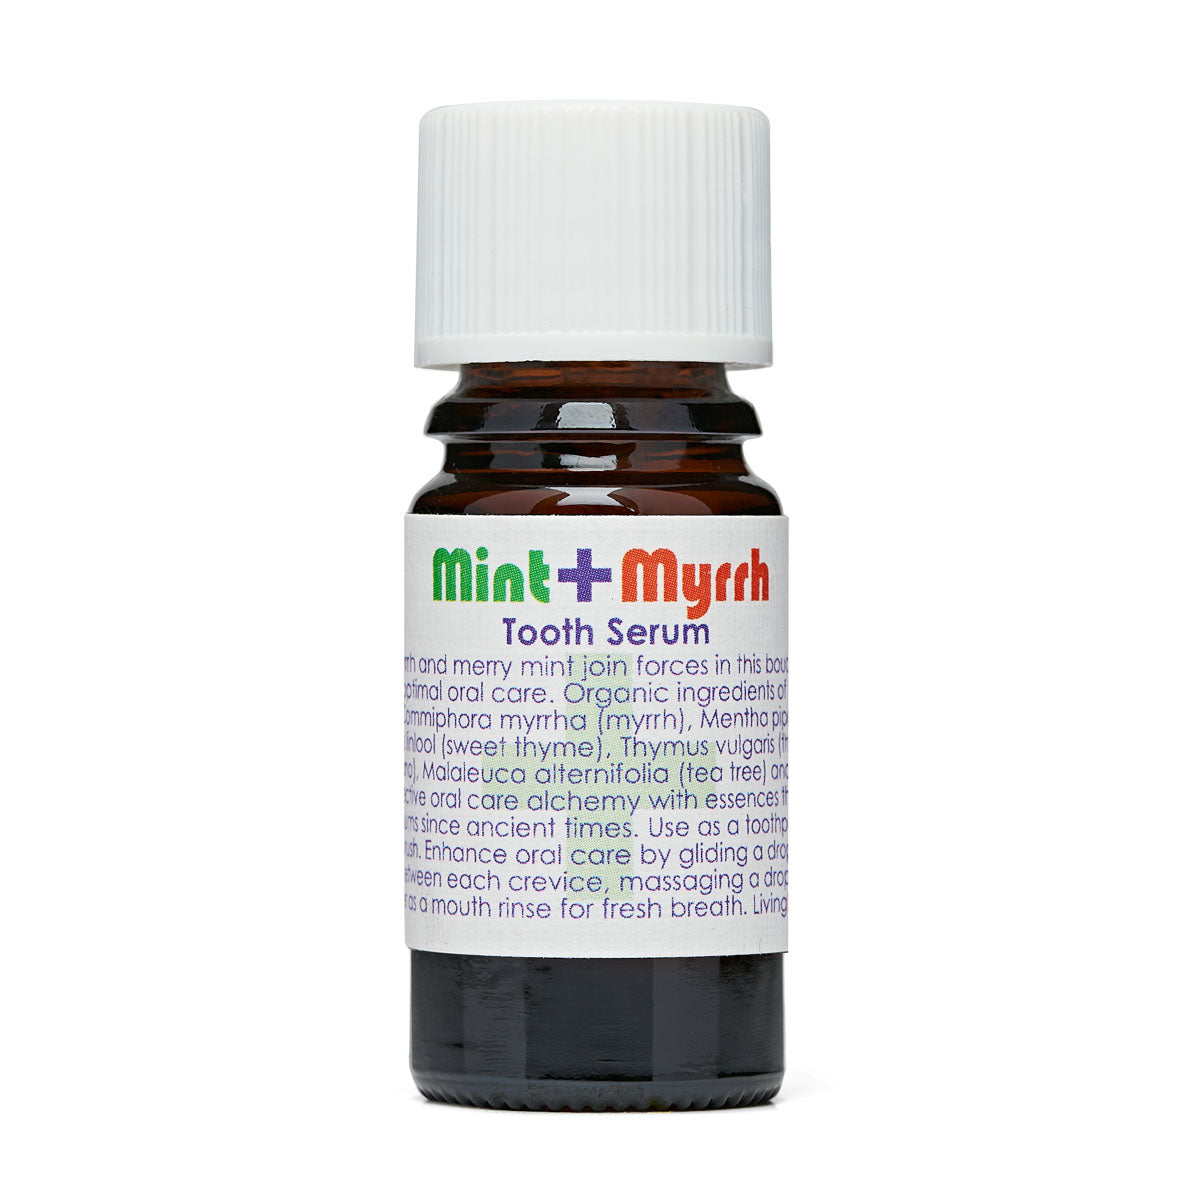 Mint &amp; Myrrh Tooth Serum | Living Libations | Raw Living UK | Beauty | Fragrance | Living Libations Mint &amp; Myrrh Tooth Serum (5ml): a Natural &amp; Vegan Tooth Care Product, made with a blend inspired by ancient oral hygiene wisdom.